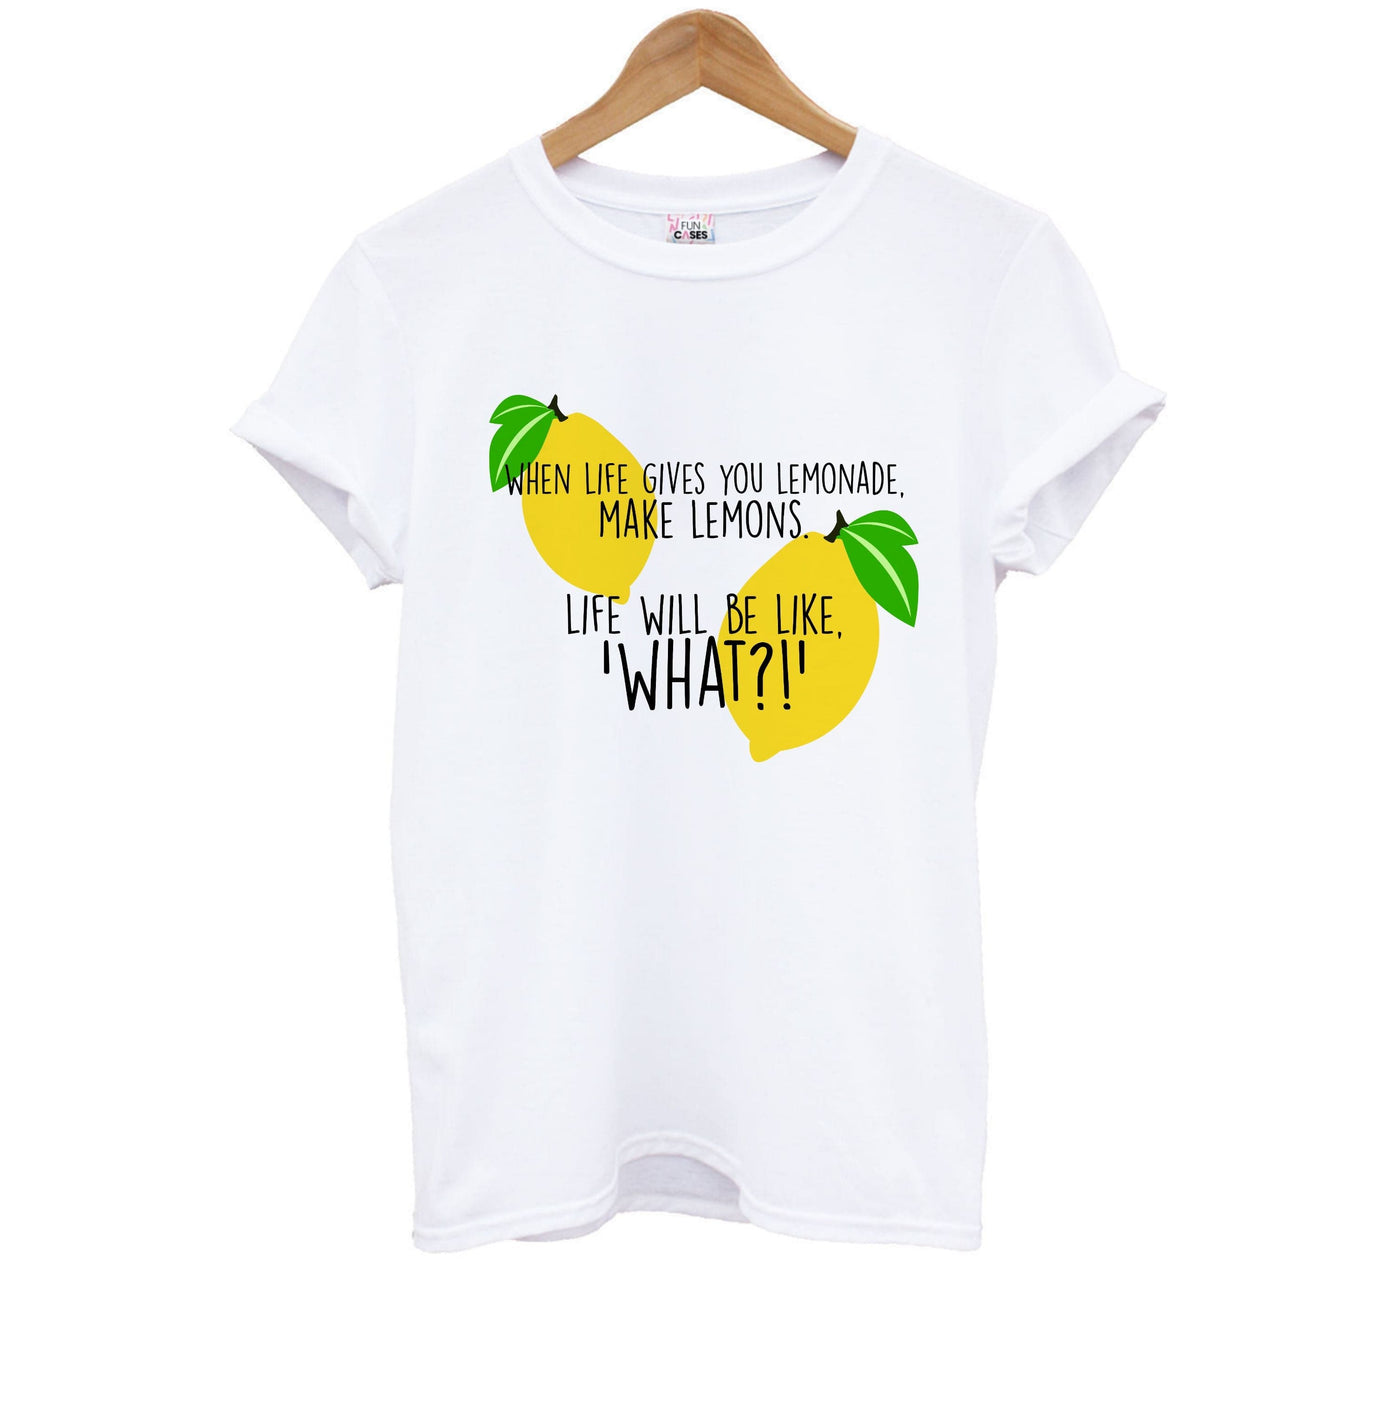 When Life Gives You Lemonade - TV Quotes Kids T-Shirt